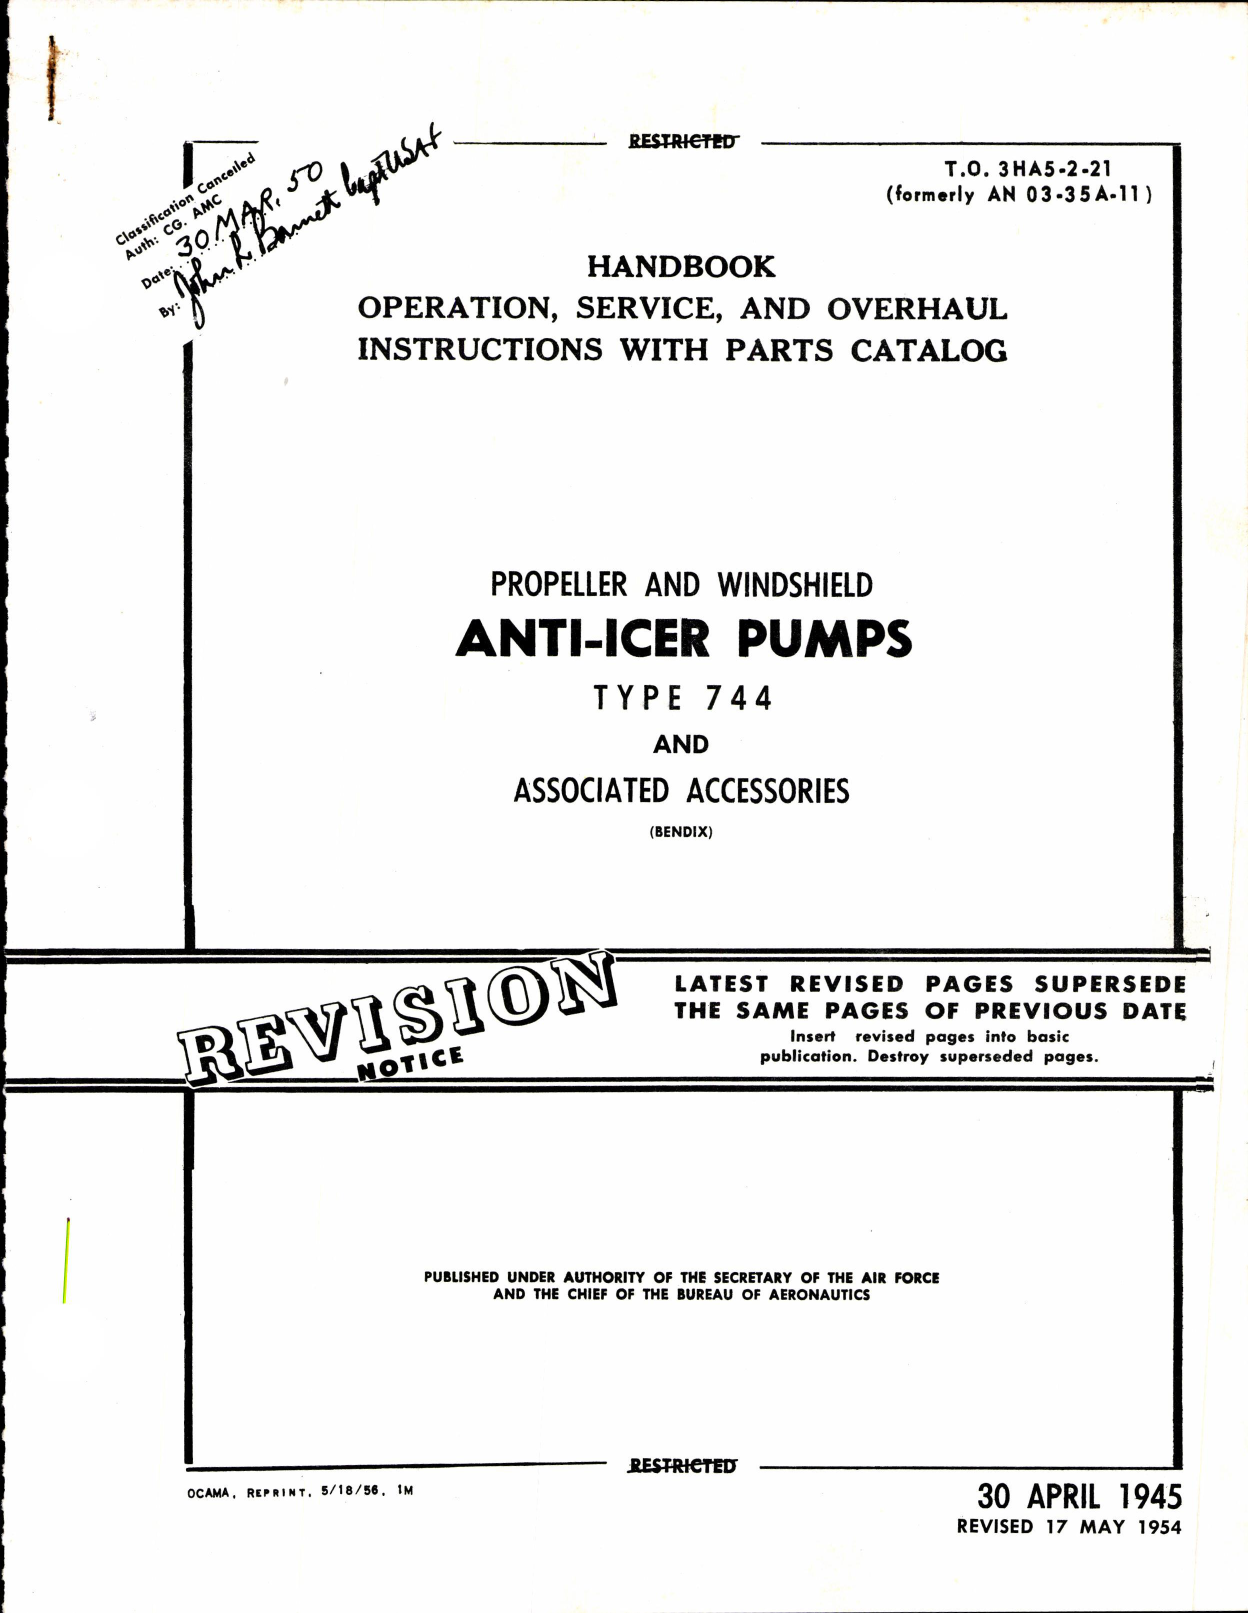 Sample page 1 from AirCorps Library document: Propeller and Windshield Anti-Icer Pumps, Type 744